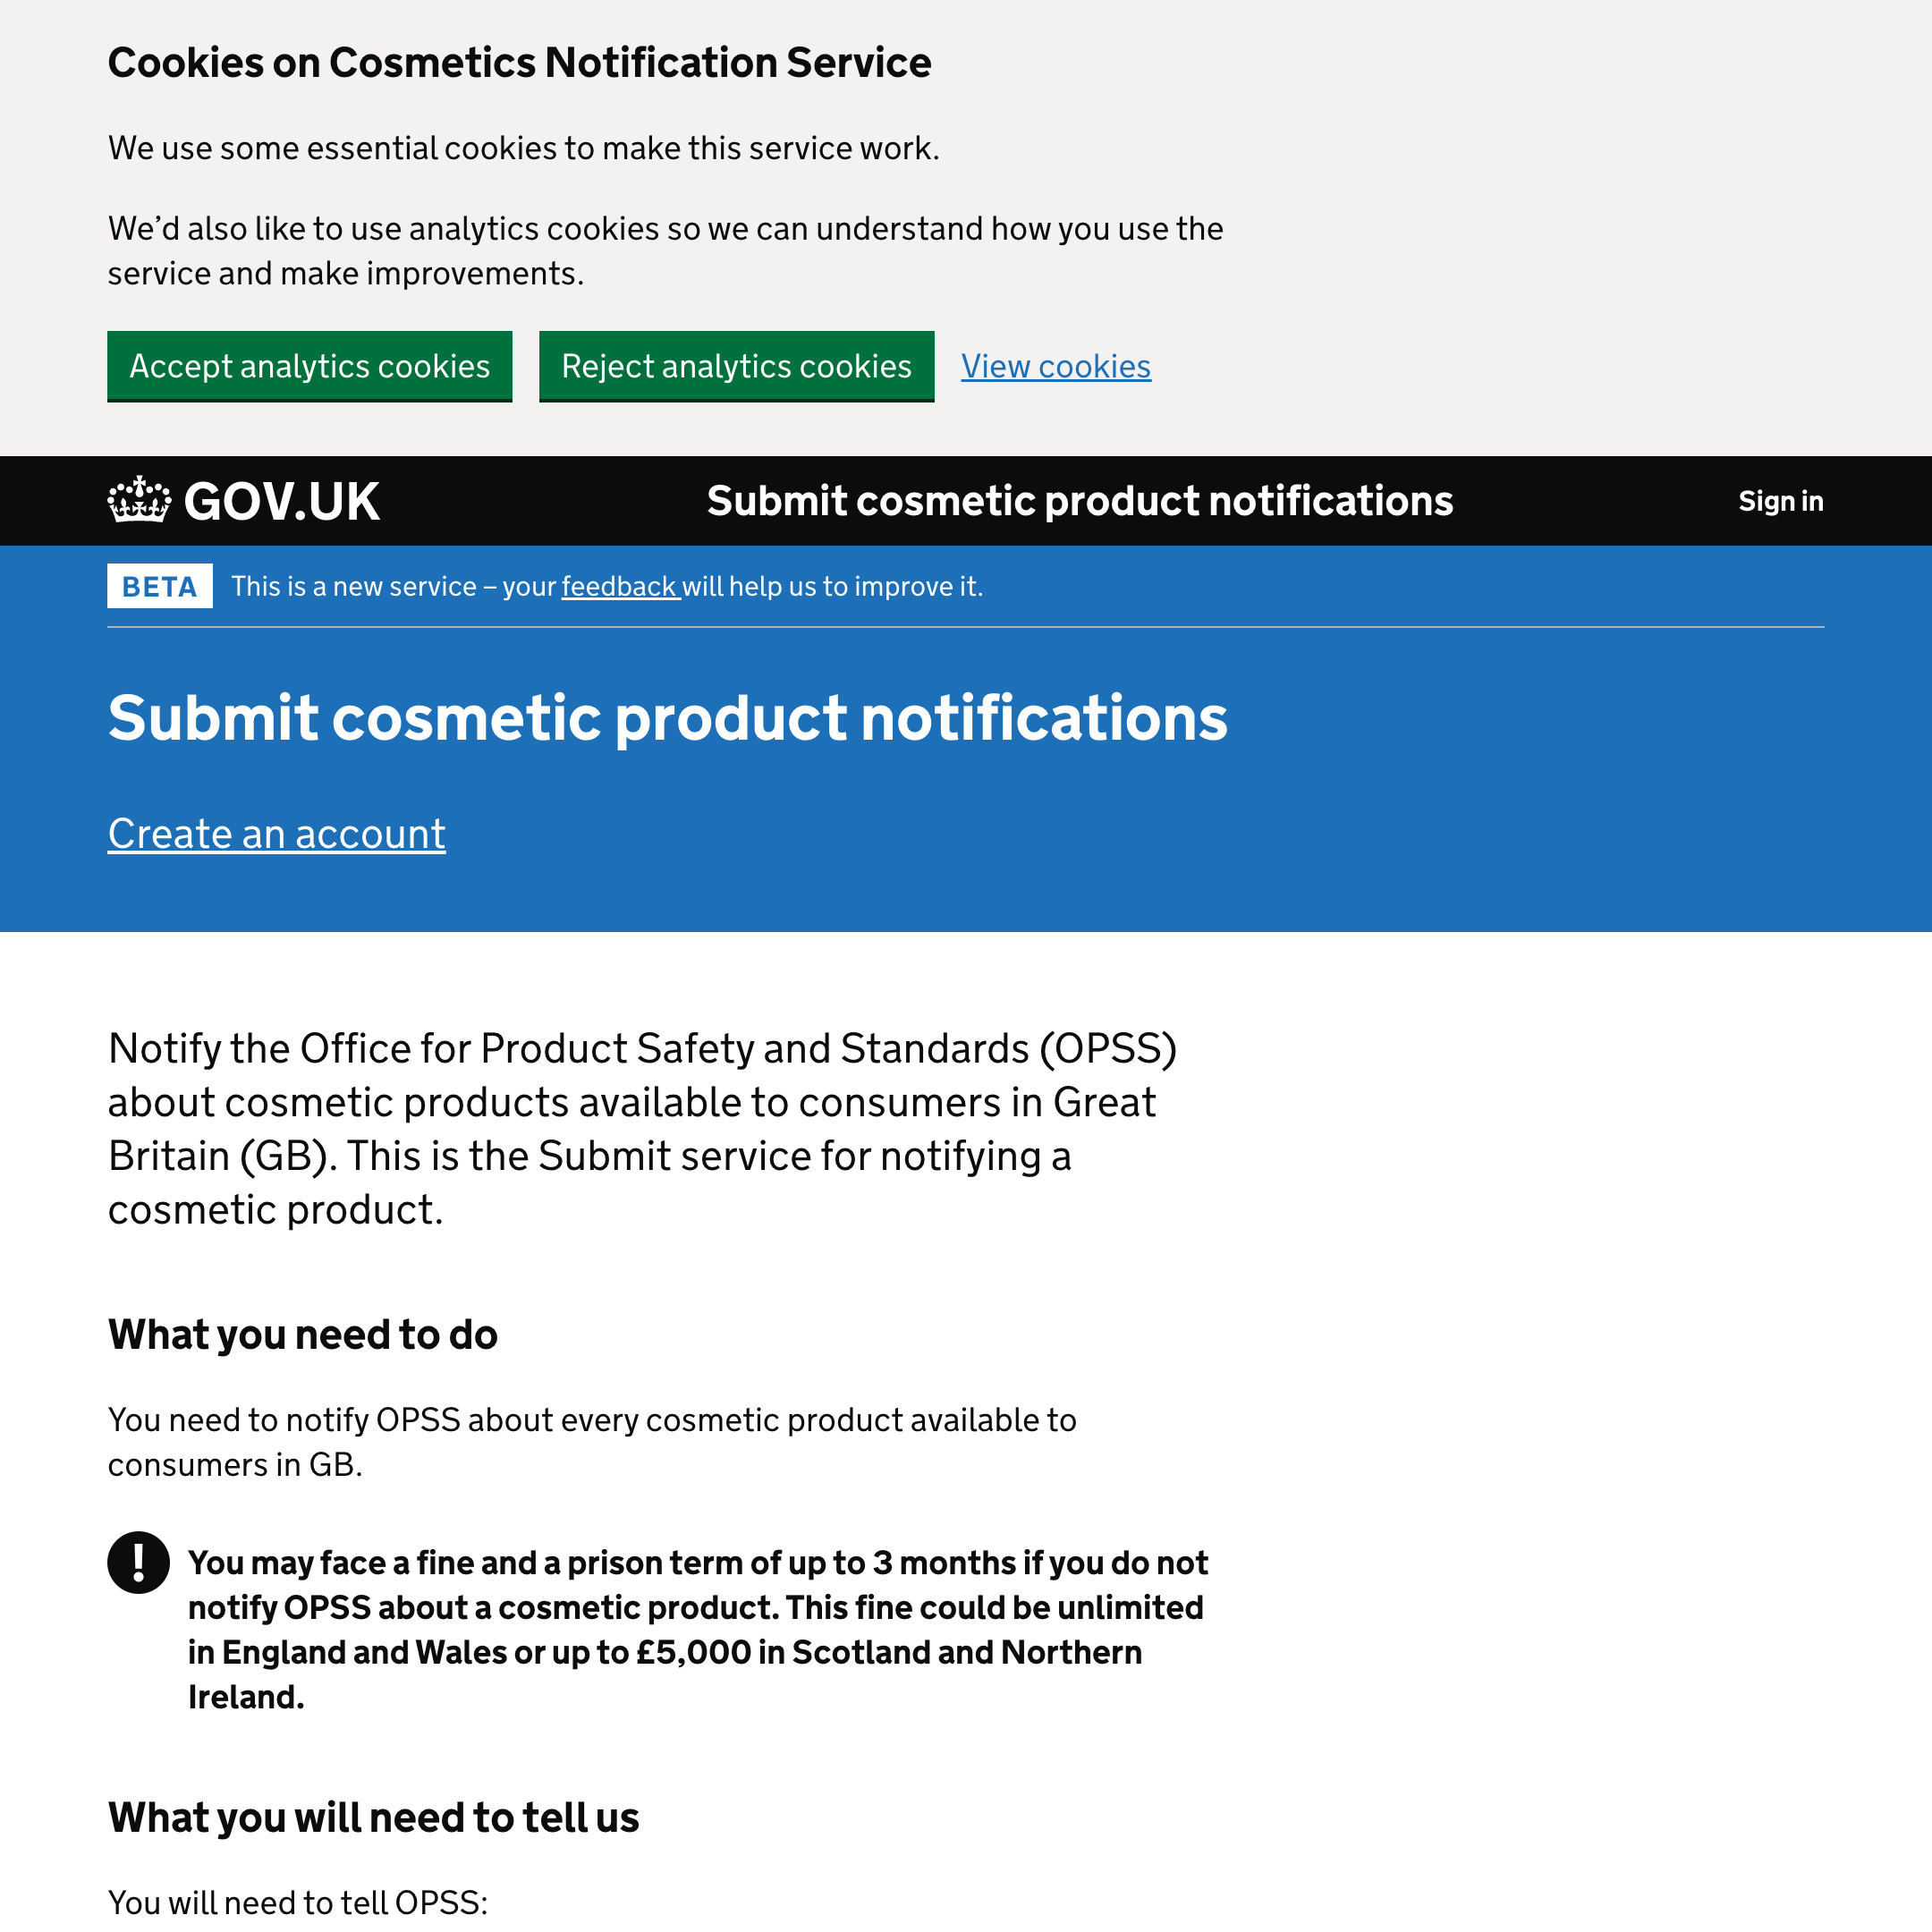 Submit cosmetic product notifications